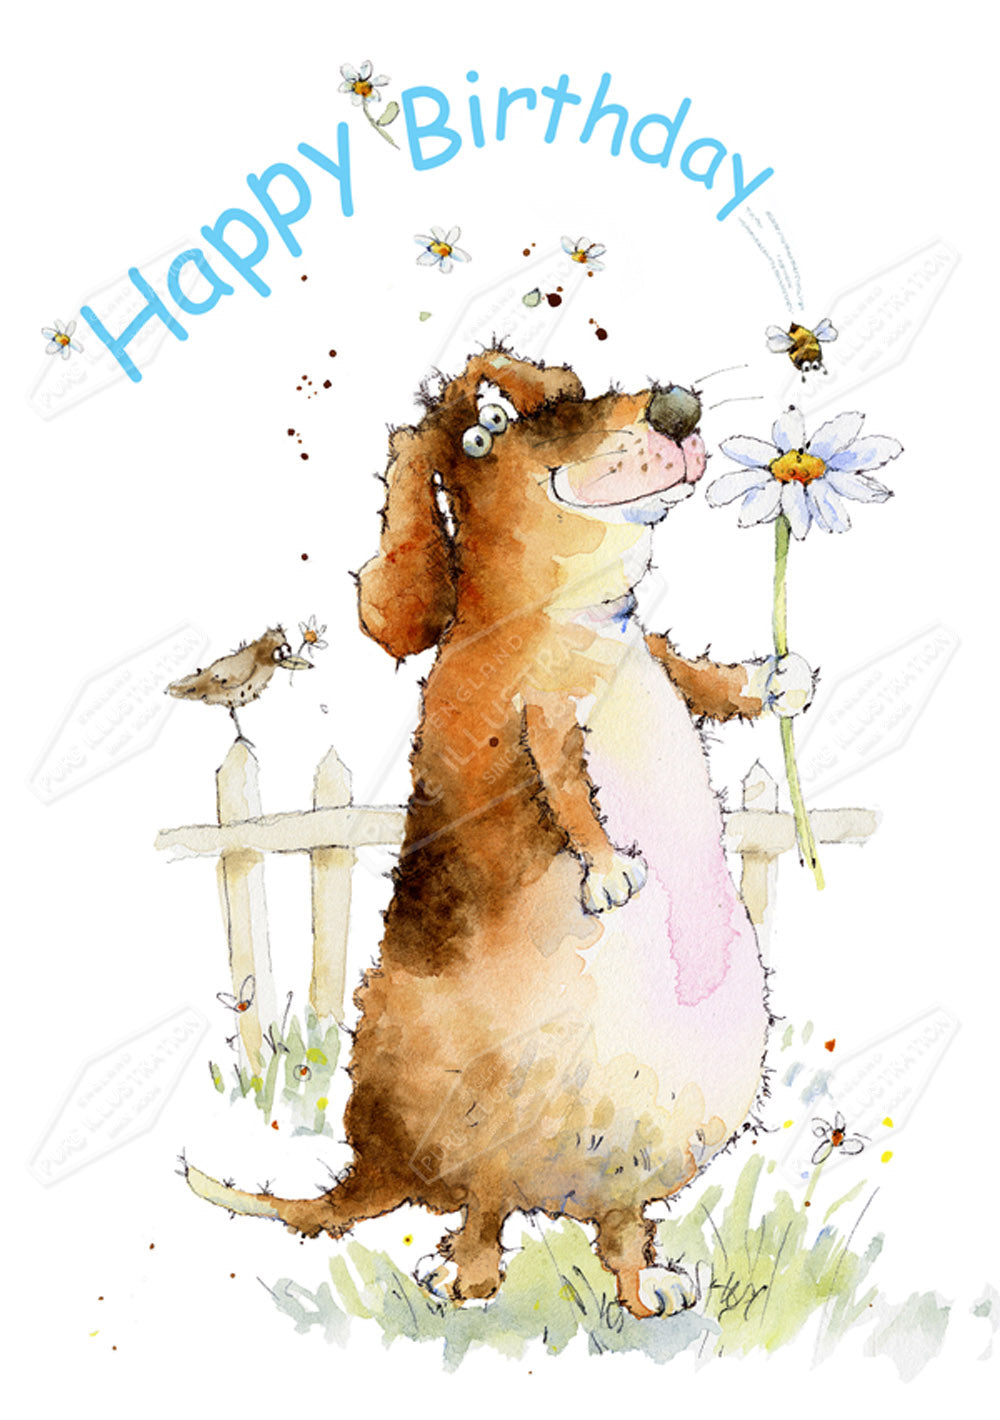 00016685JPA- Jan Pashley is represented by Pure Art Licensing Agency - Birthday Greeting Card Design